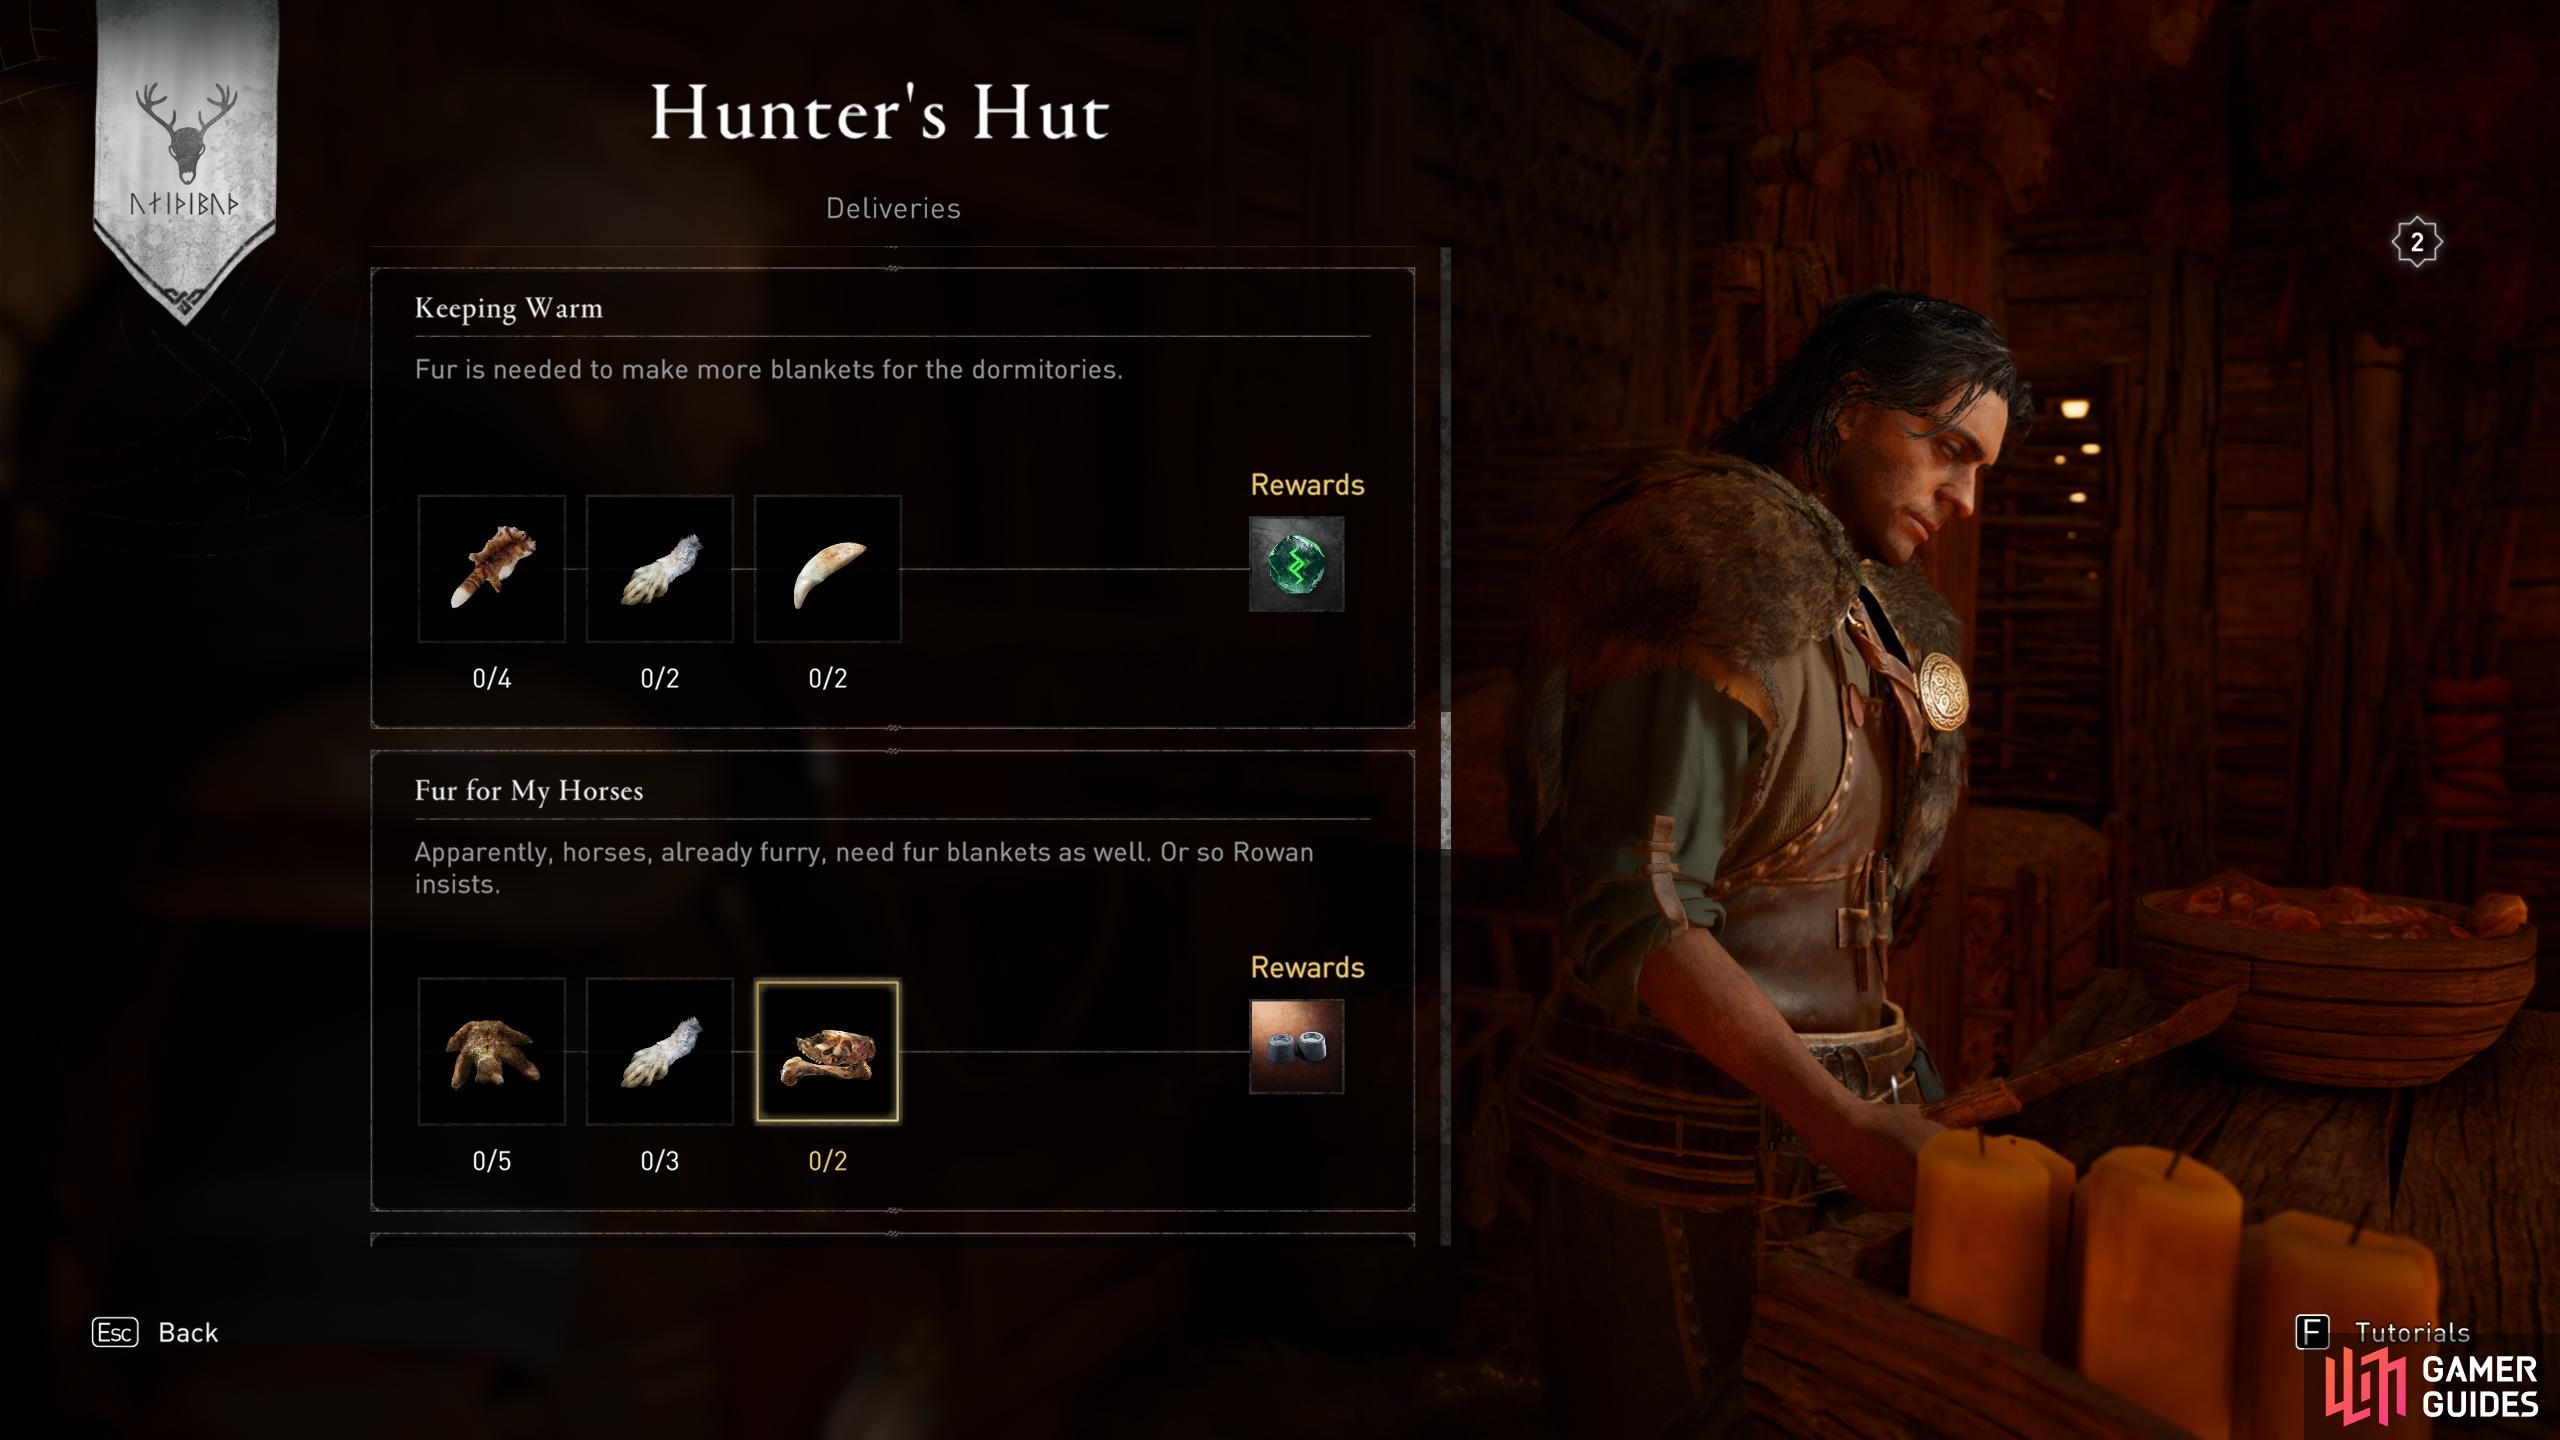 You can hand in animal parts such as antlers, hooves, tusks, claws, and much more in exchange for rewards at the Hunter's Hut.